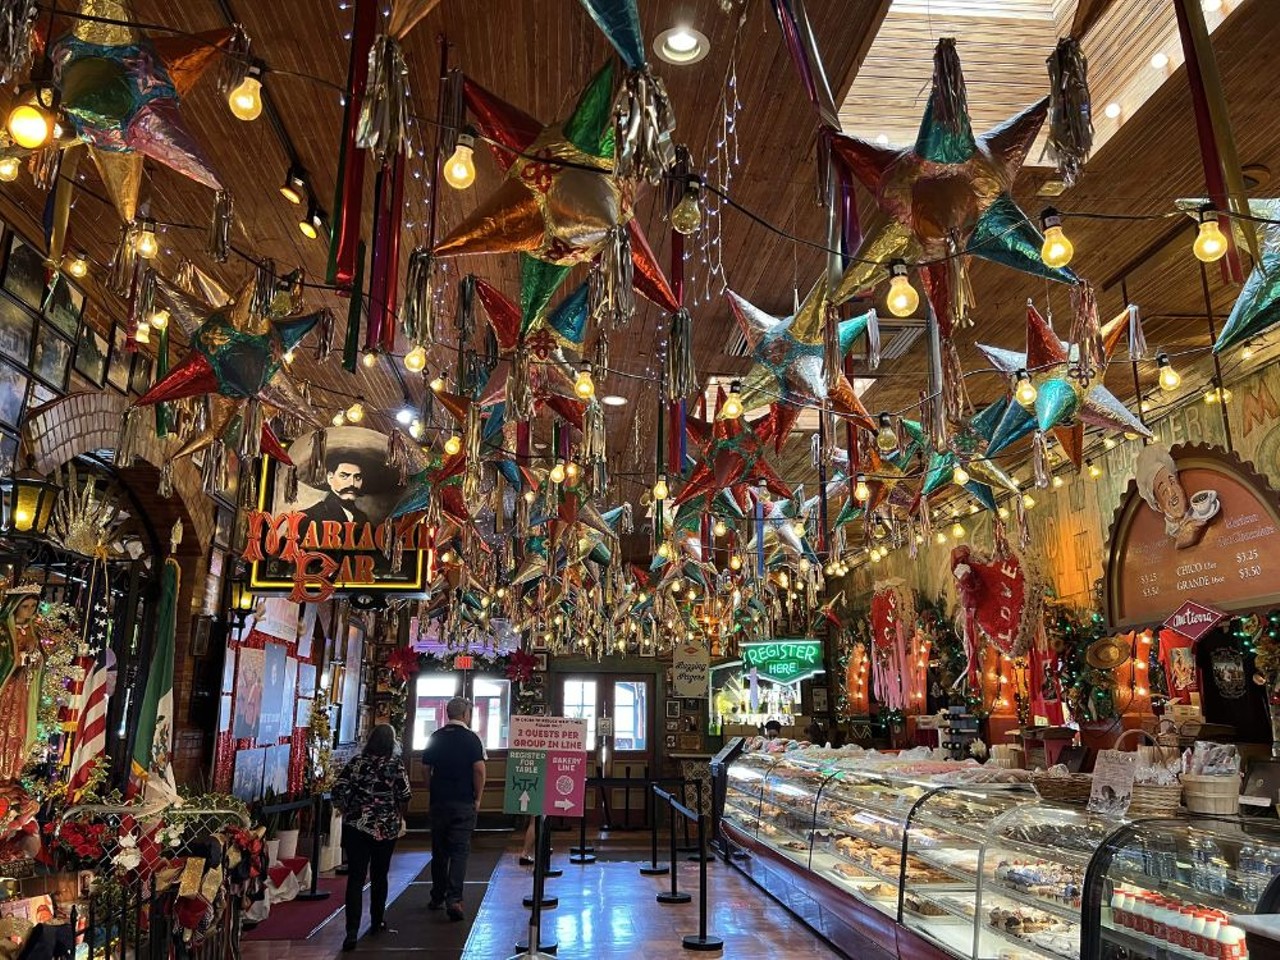 Mi Tierra
218 Produce Row, (210) 225-1262, mitierracafe.com
Many a selfie has been taken in front of Mi Tierra’s glittering estrellas and larger-than-life murals, creating nearly a rite of passage for locals and visitors alike. While you’re at it, wander out front and snap one with about a million papel picado fluttering in the background.